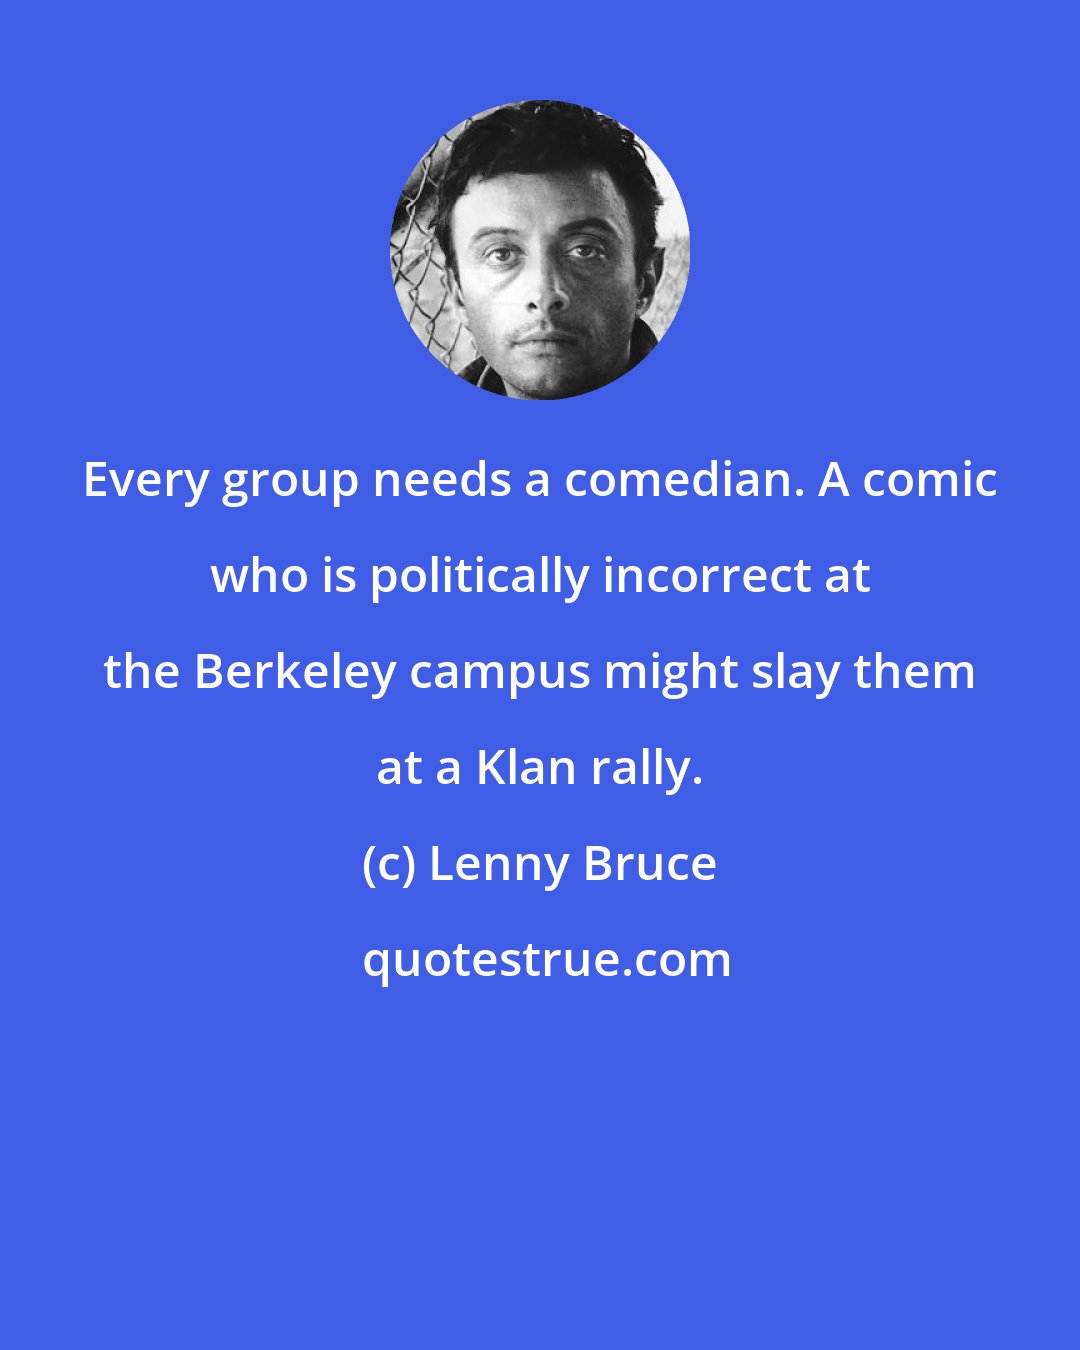 Lenny Bruce: Every group needs a comedian. A comic who is politically incorrect at the Berkeley campus might slay them at a Klan rally.